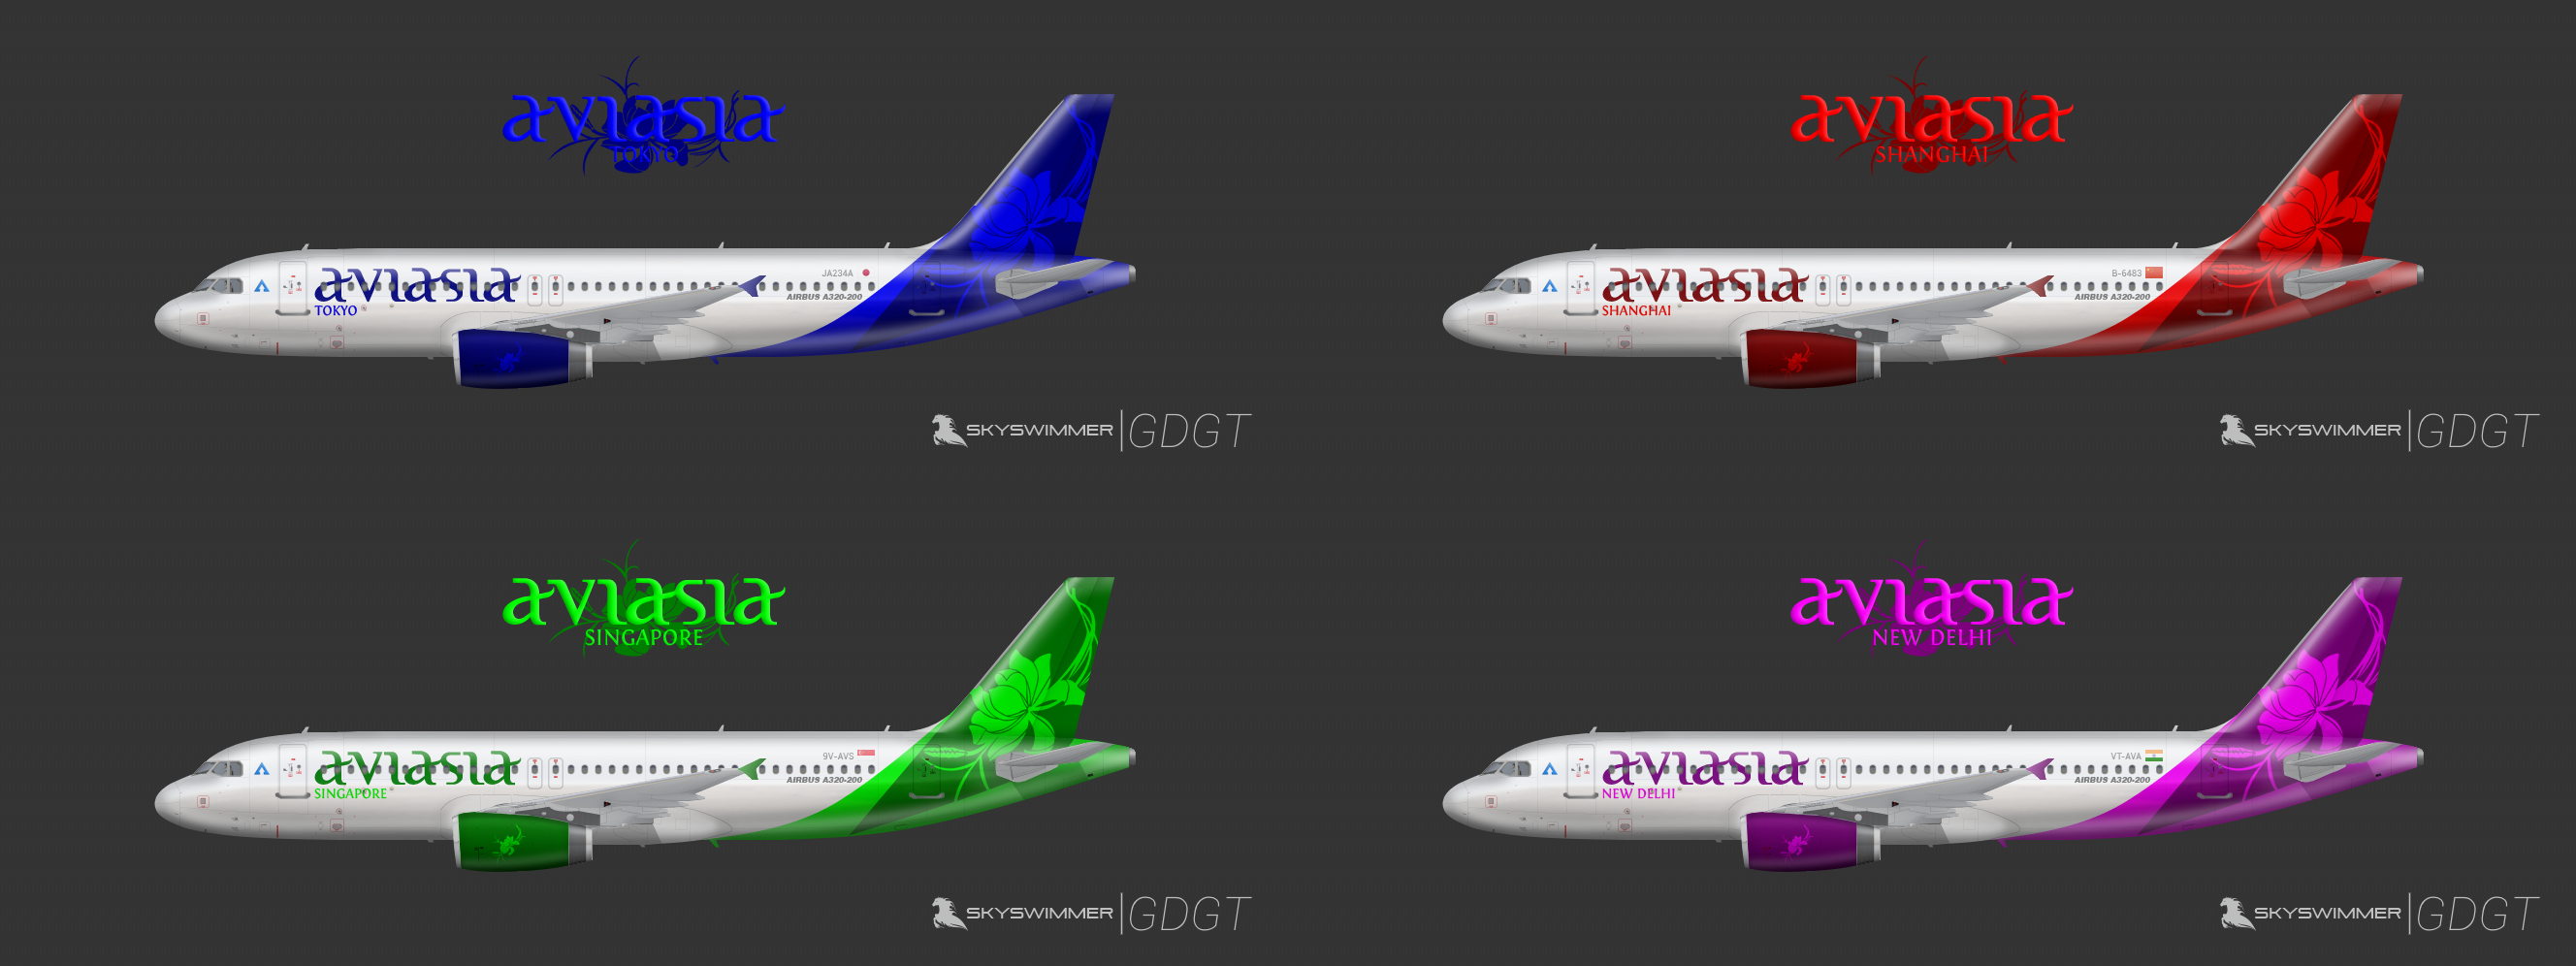 Louis Vuitton Airbus A318 - SkySwimmer's Gallery of Confidently  Eye-friendly Liveries - Gallery - Airline Empires